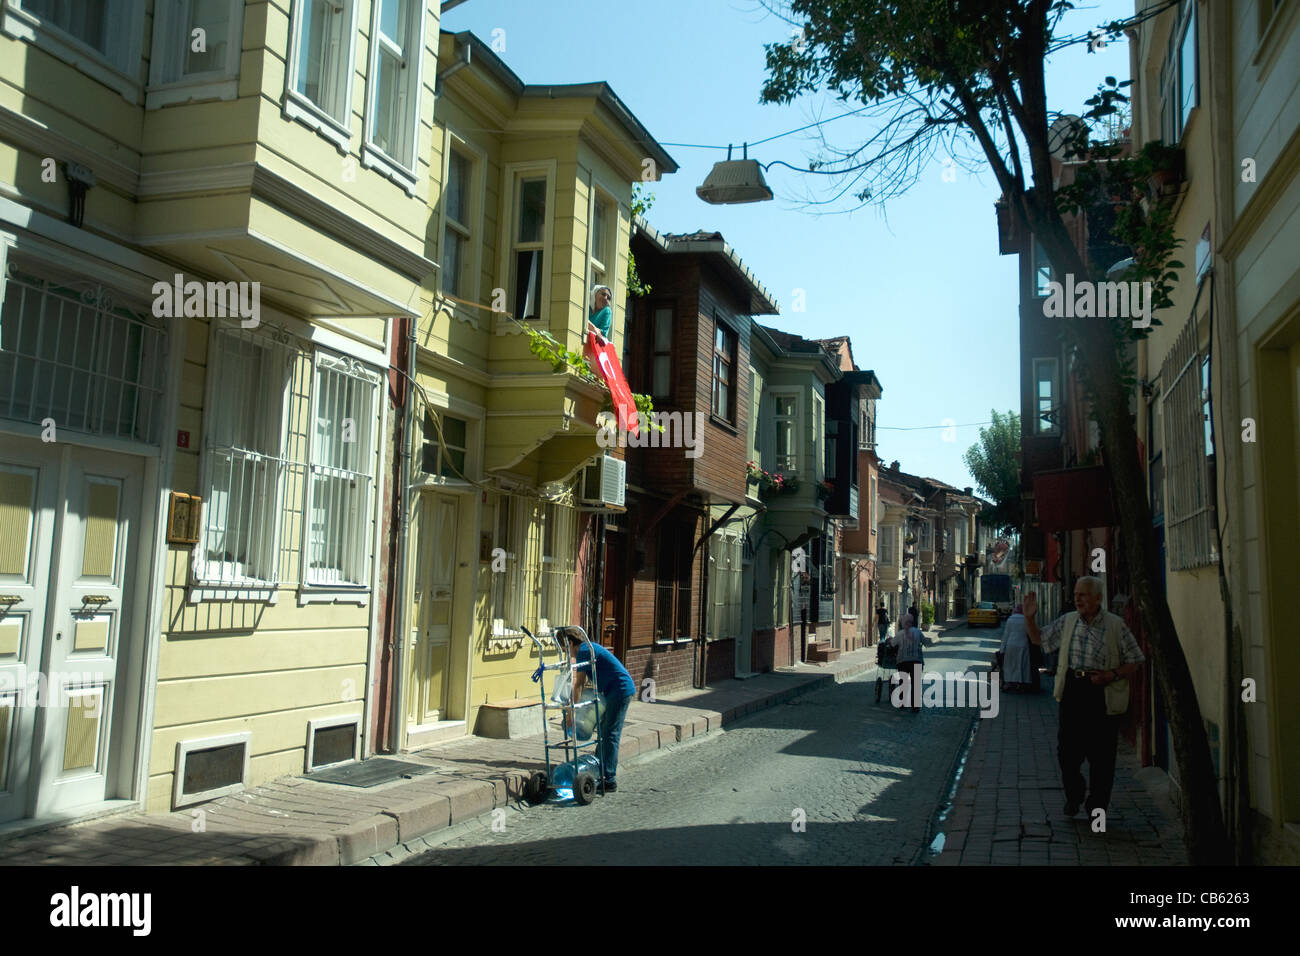 A sunny street of Ottoman-style houses in Istanbul's Sultanahmet district Stock Photo